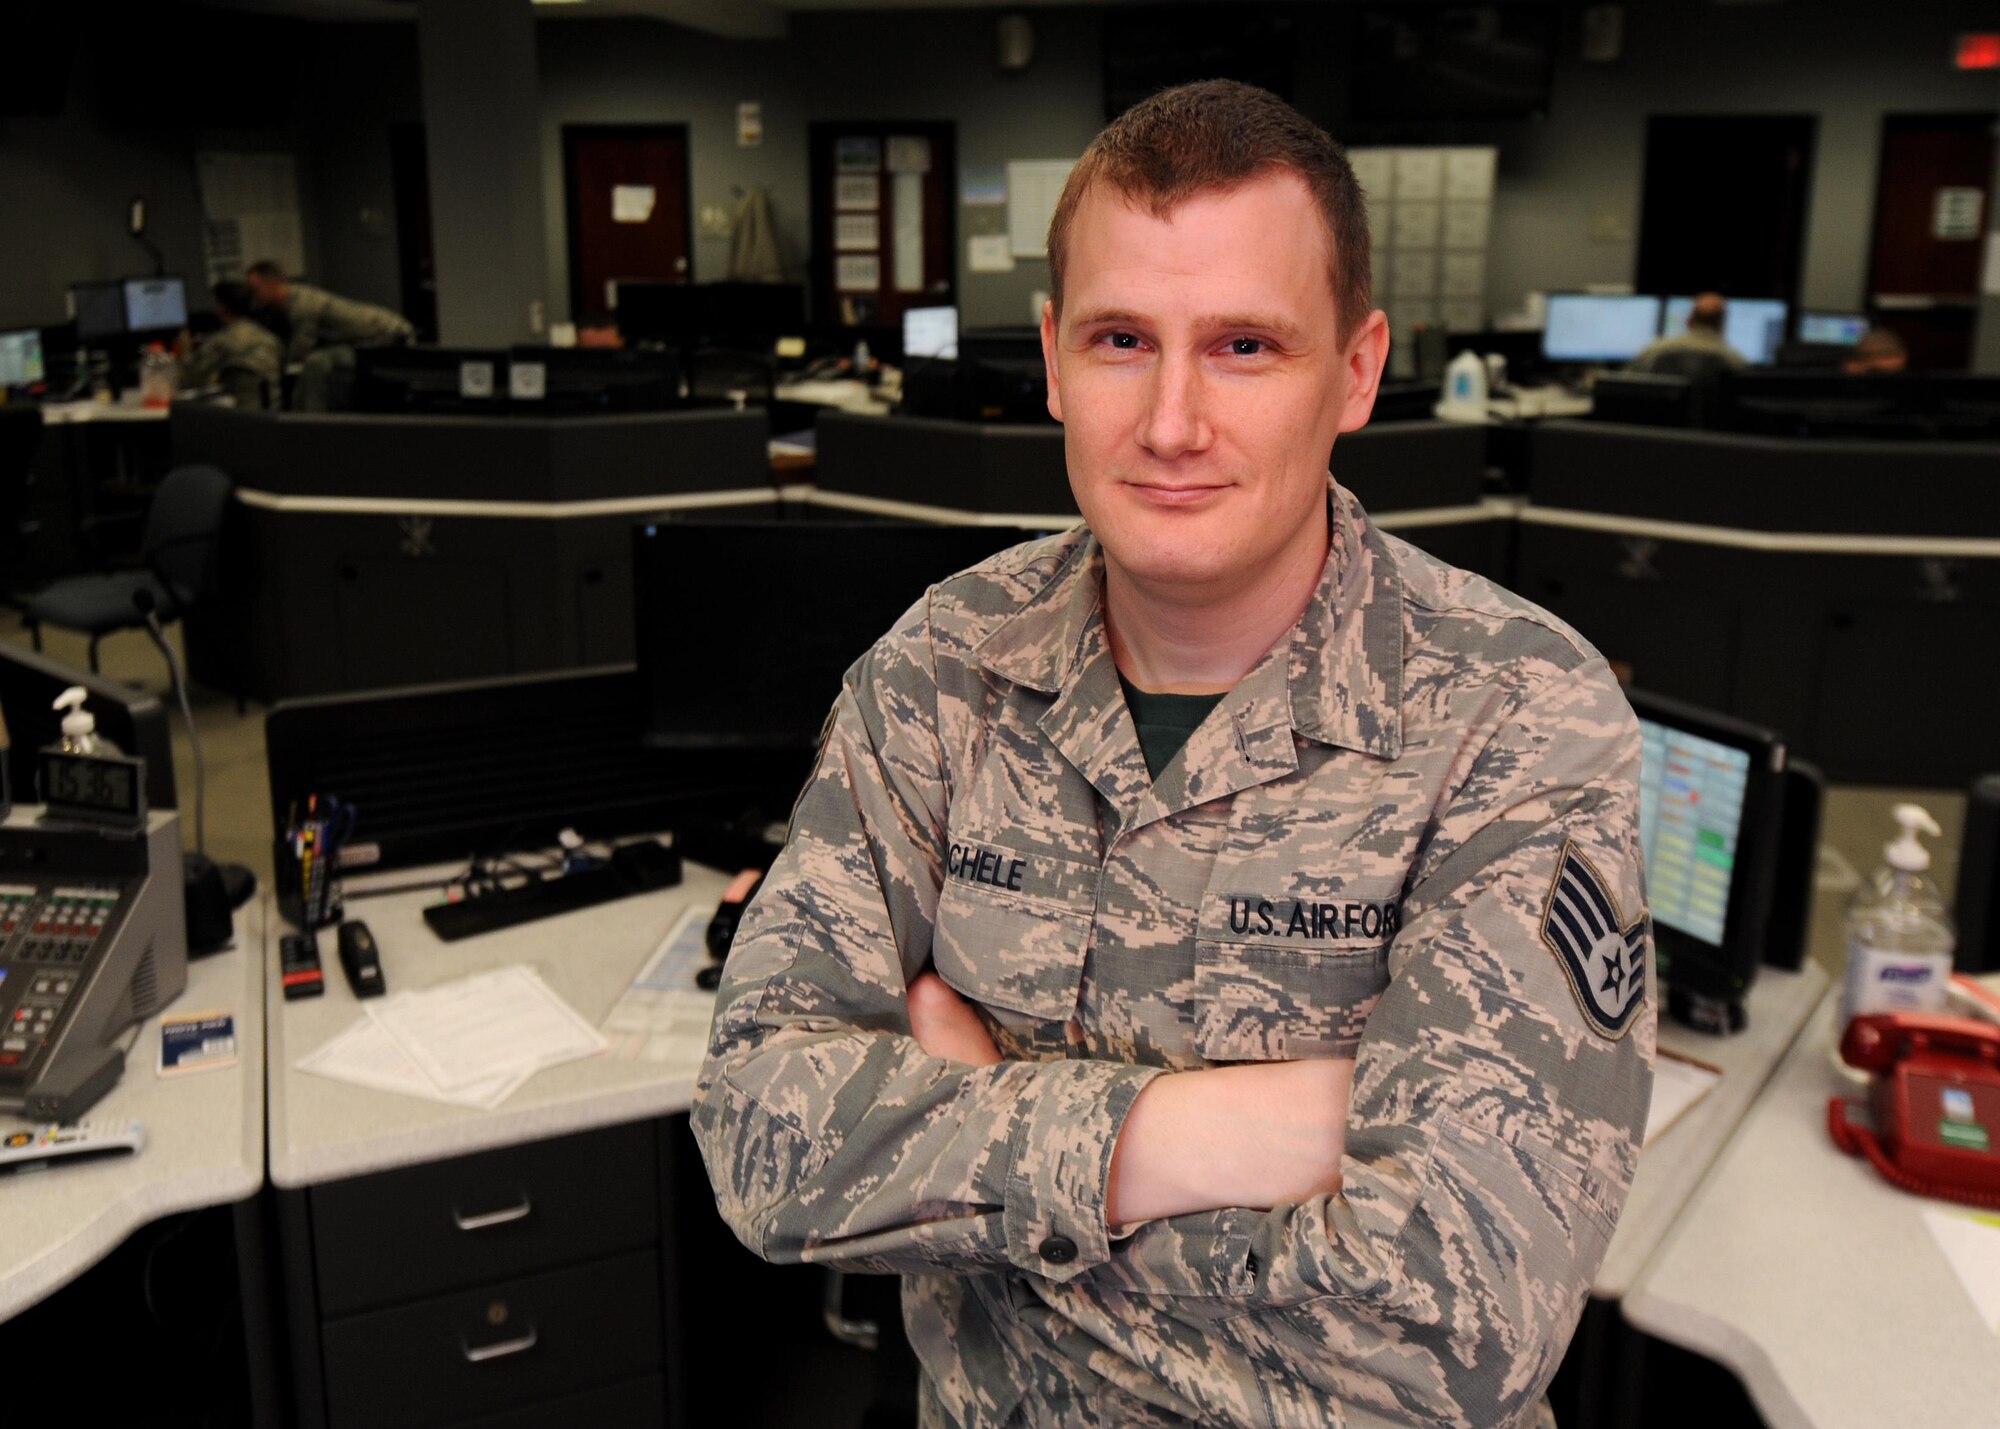 U.S. Air Force Staff Sgt. Justin Buchele, 19th Airlift Wing command post systems NCO in charge, was nominated as Combat Airlifter of the Week March 10, 2017, at Little Rock Air Force Base, Ark. Buchele showcases Excellence in All We do by maintaining all of the system programs at the Little Rock AFB Command Post. (U.S. Air Force photo by Airman 1st Class Grace Nichols)